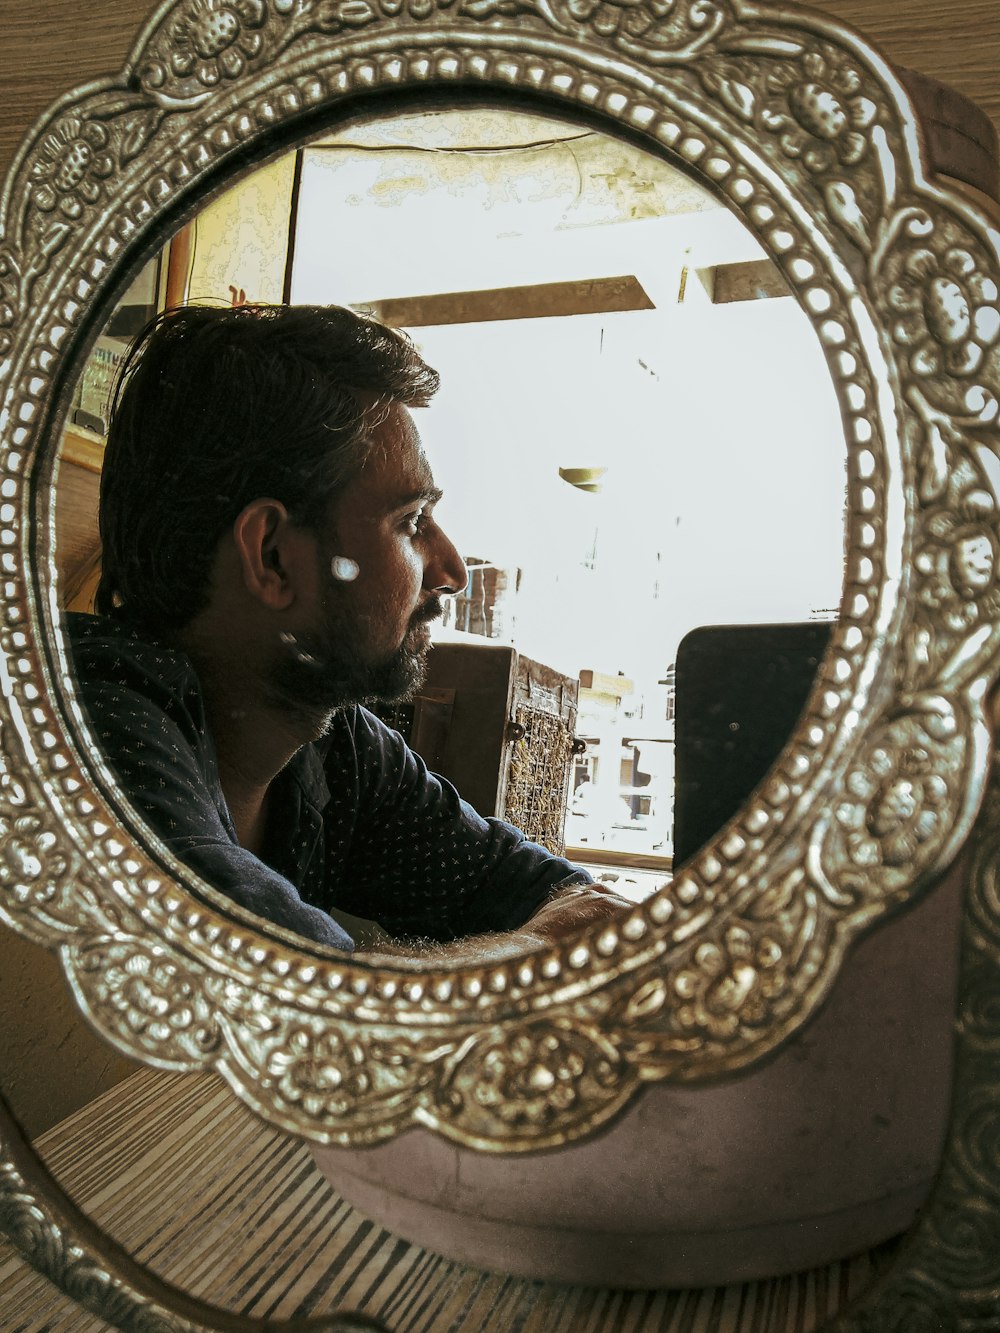 man's reflection on ornate gold-colored floral framed mirror